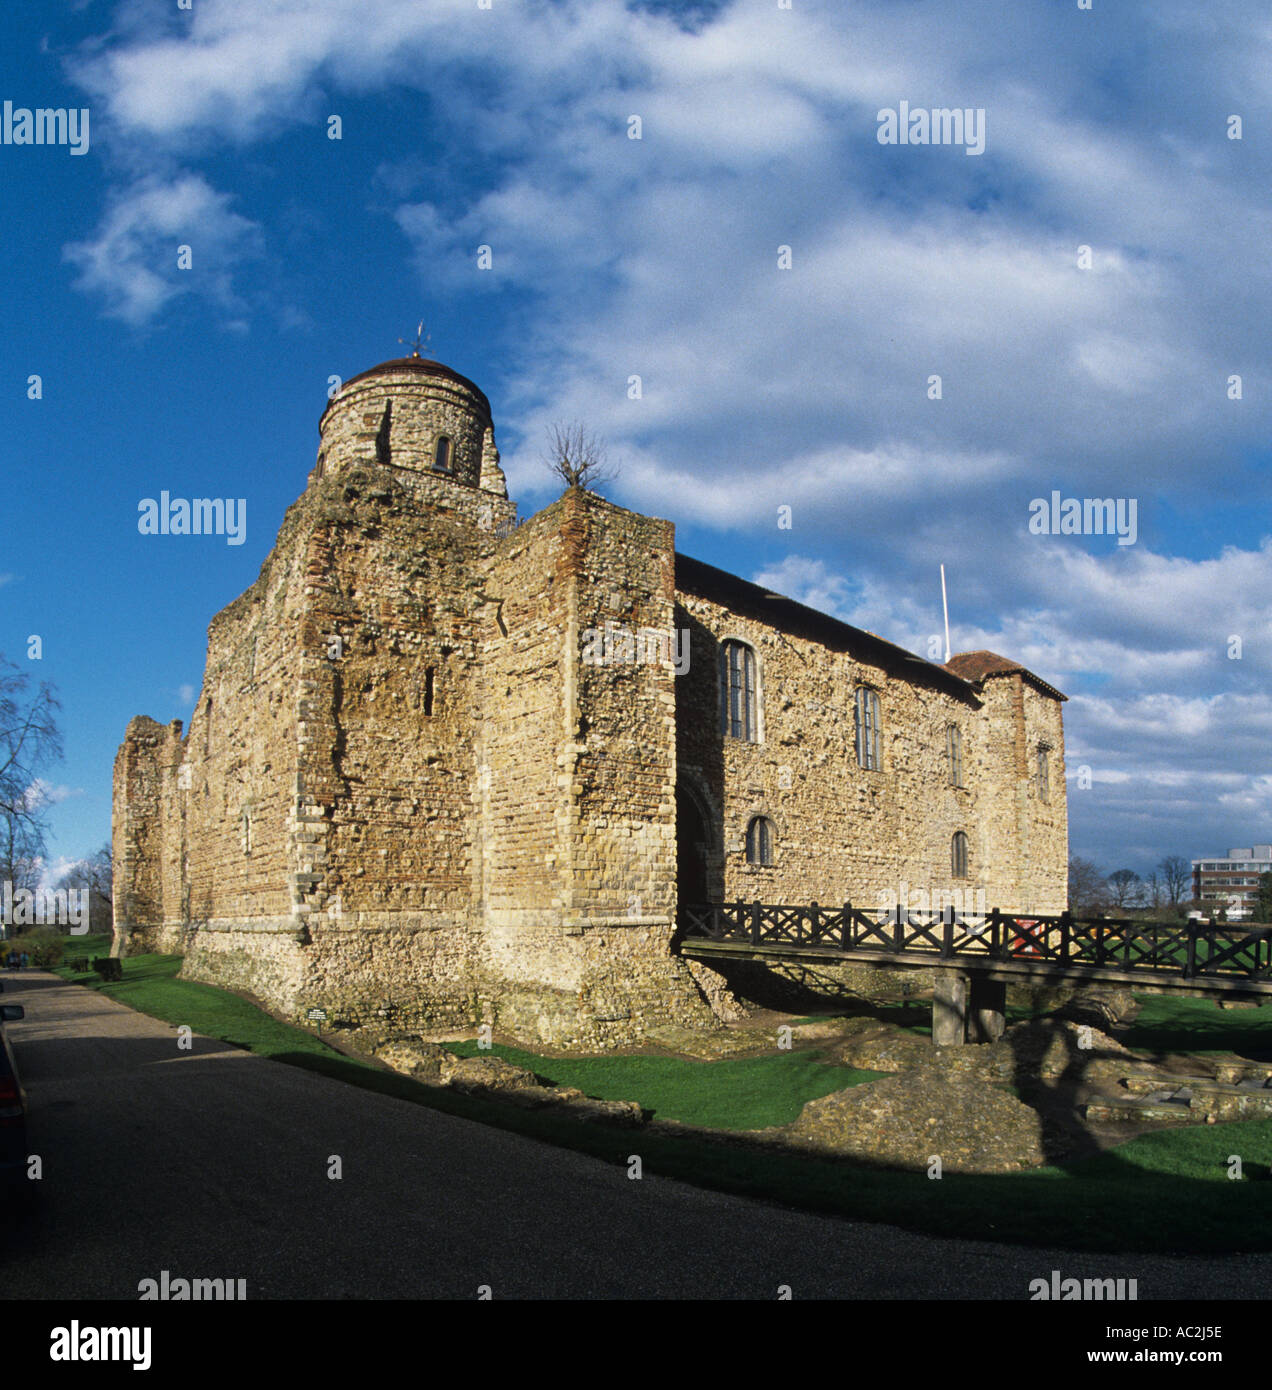 Colchester Castle The Norman keep is built on a former Roman site It contains a permanent museum Essex Stock Photo